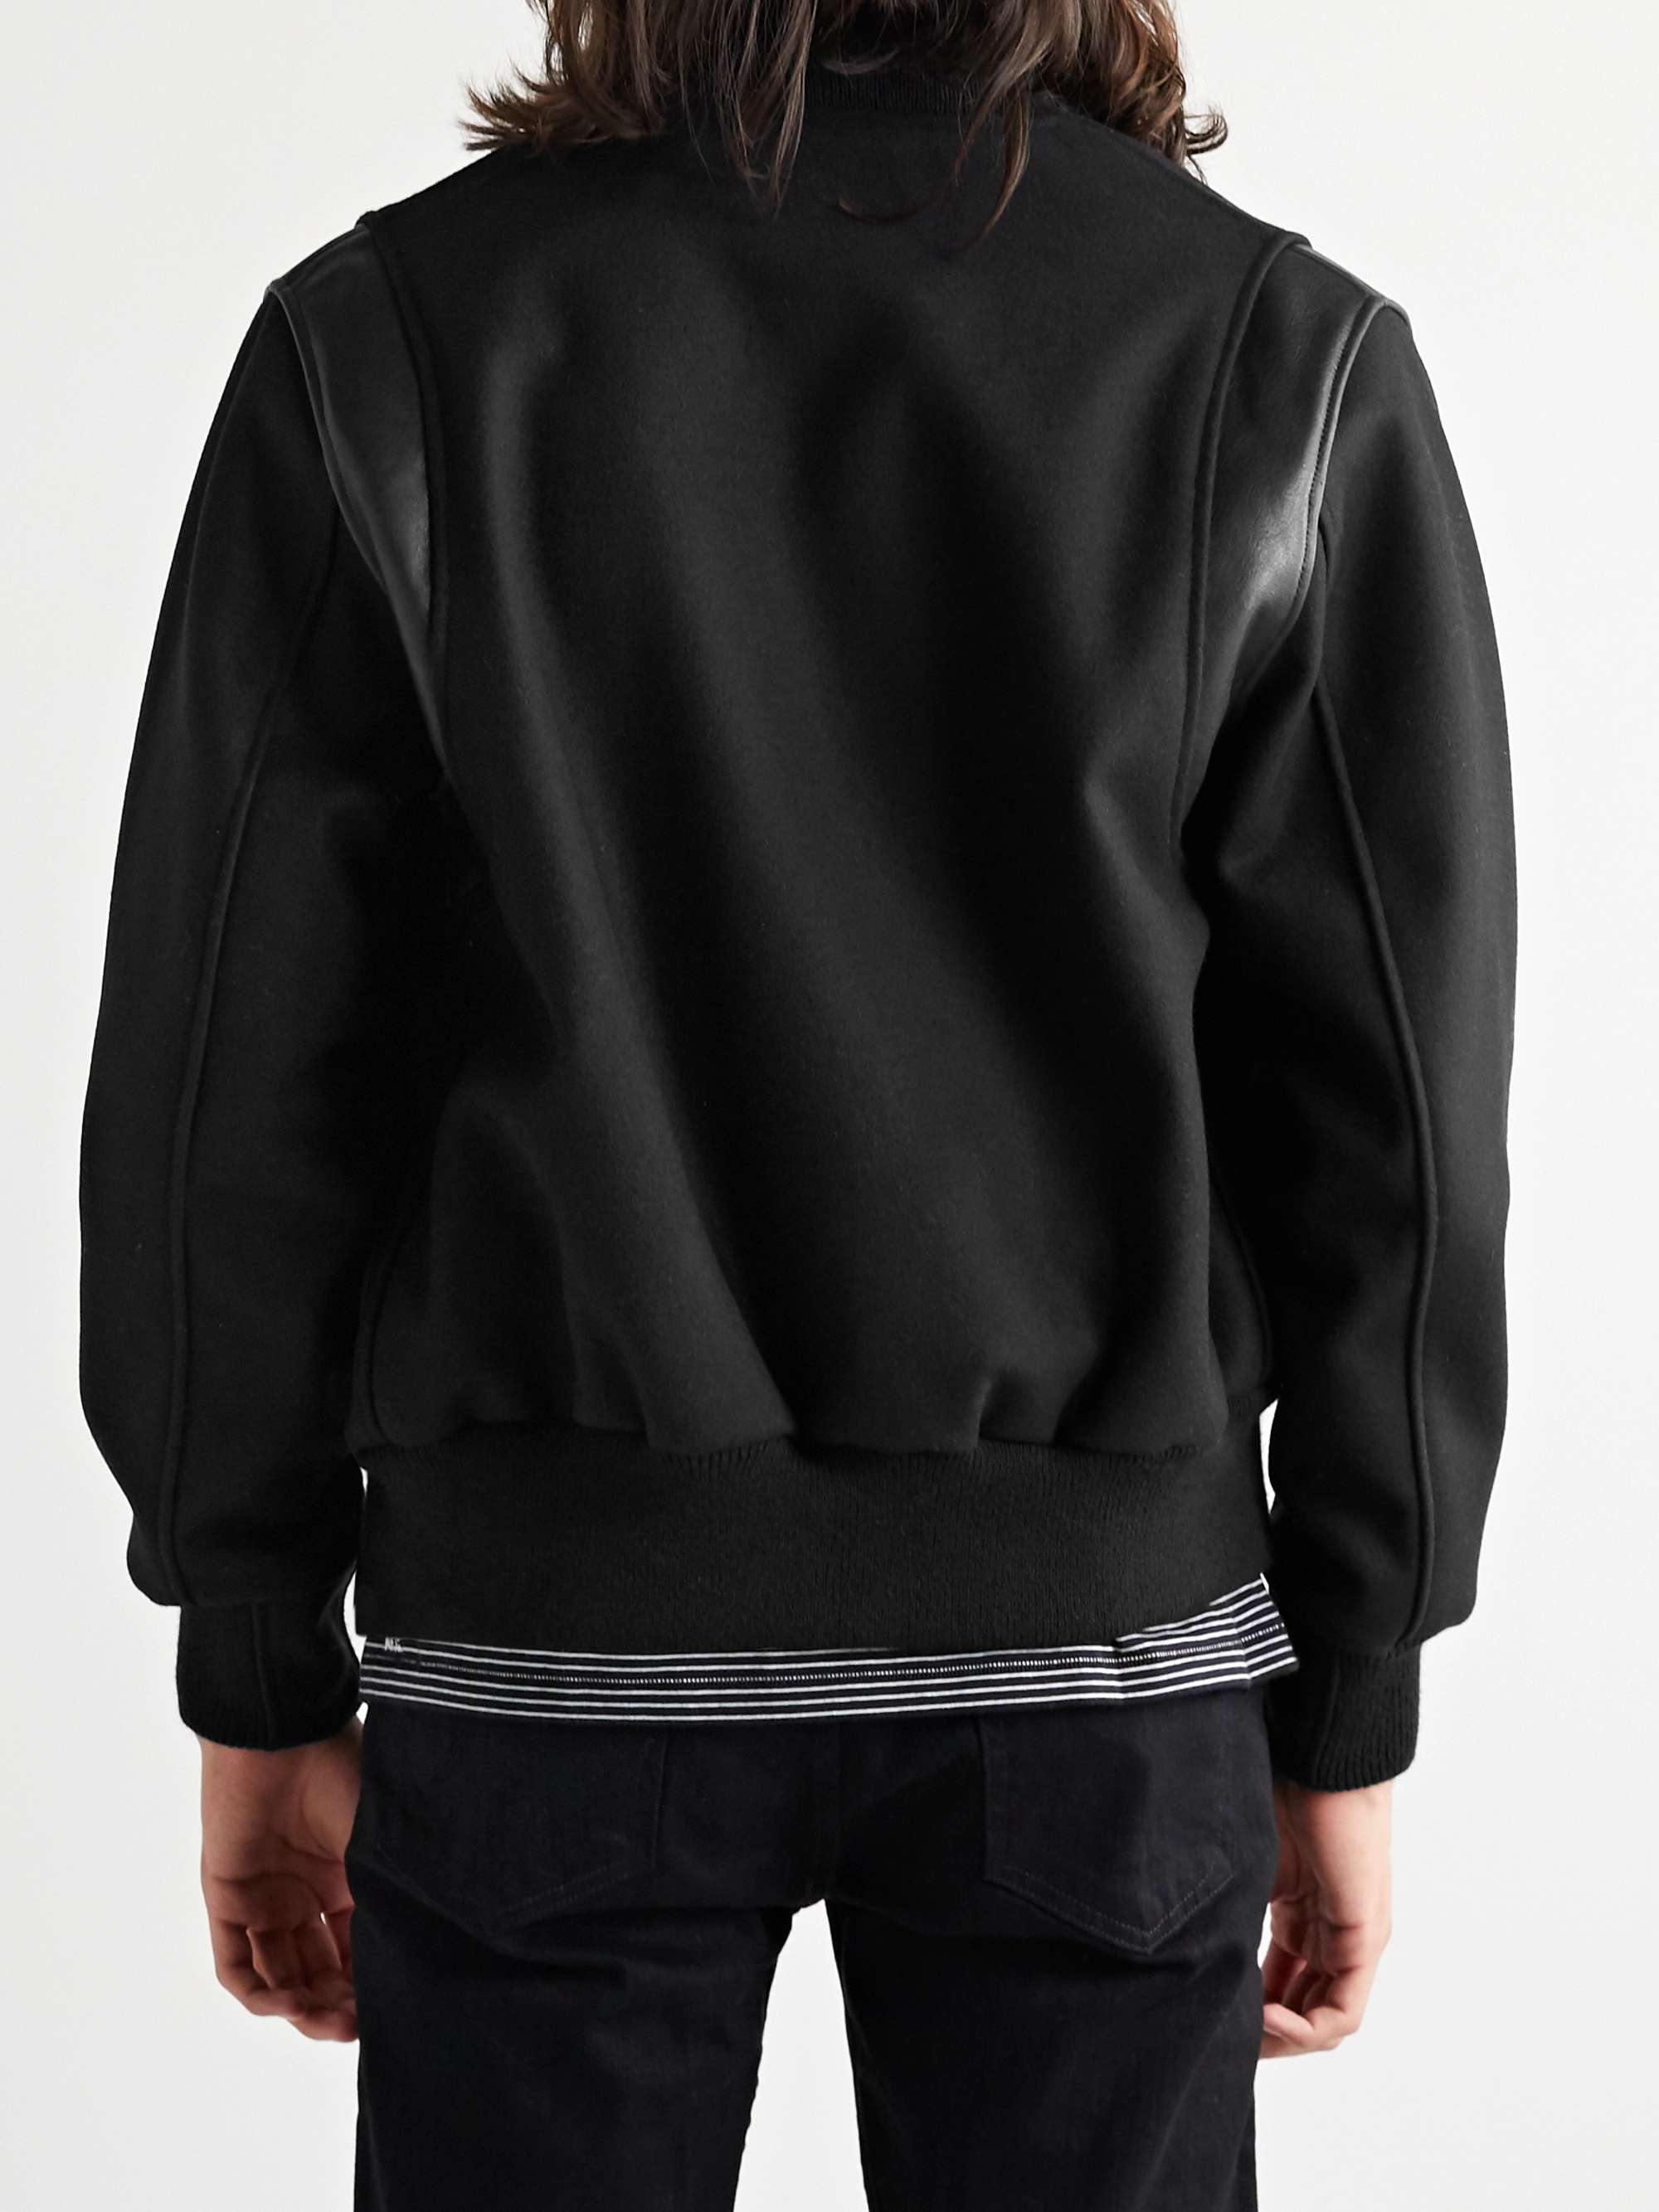 GOLDEN BEAR The Hayes Leather-Panelled Wool-Blend Bomber Jacket